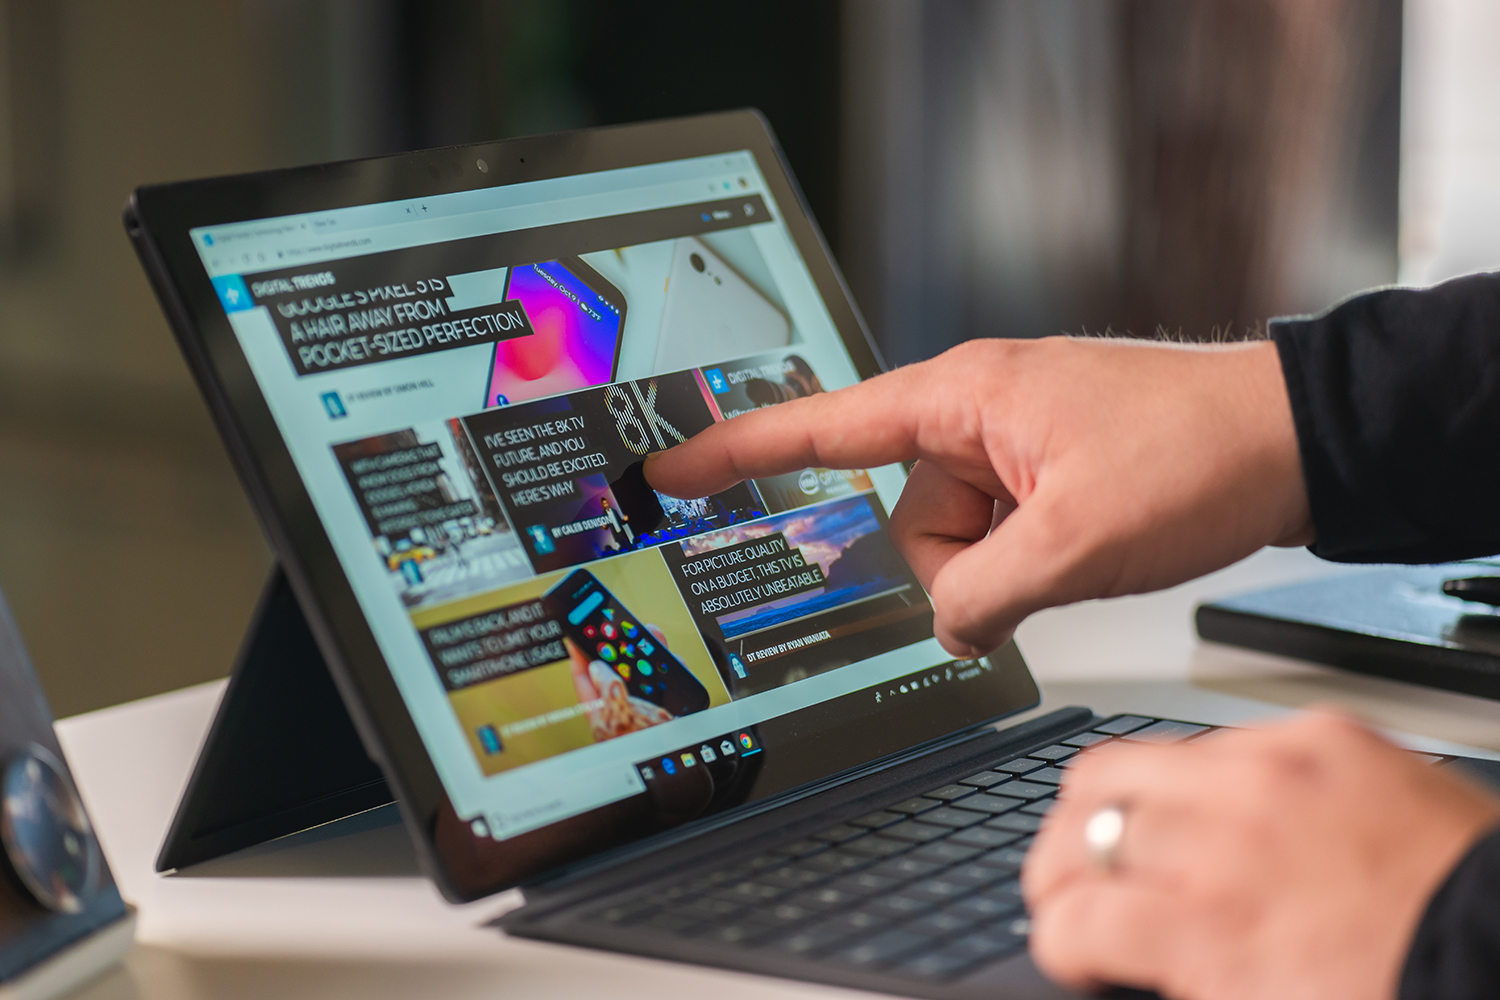 Microsoft Surface Pro 8 review: Surface perfection comes at a high